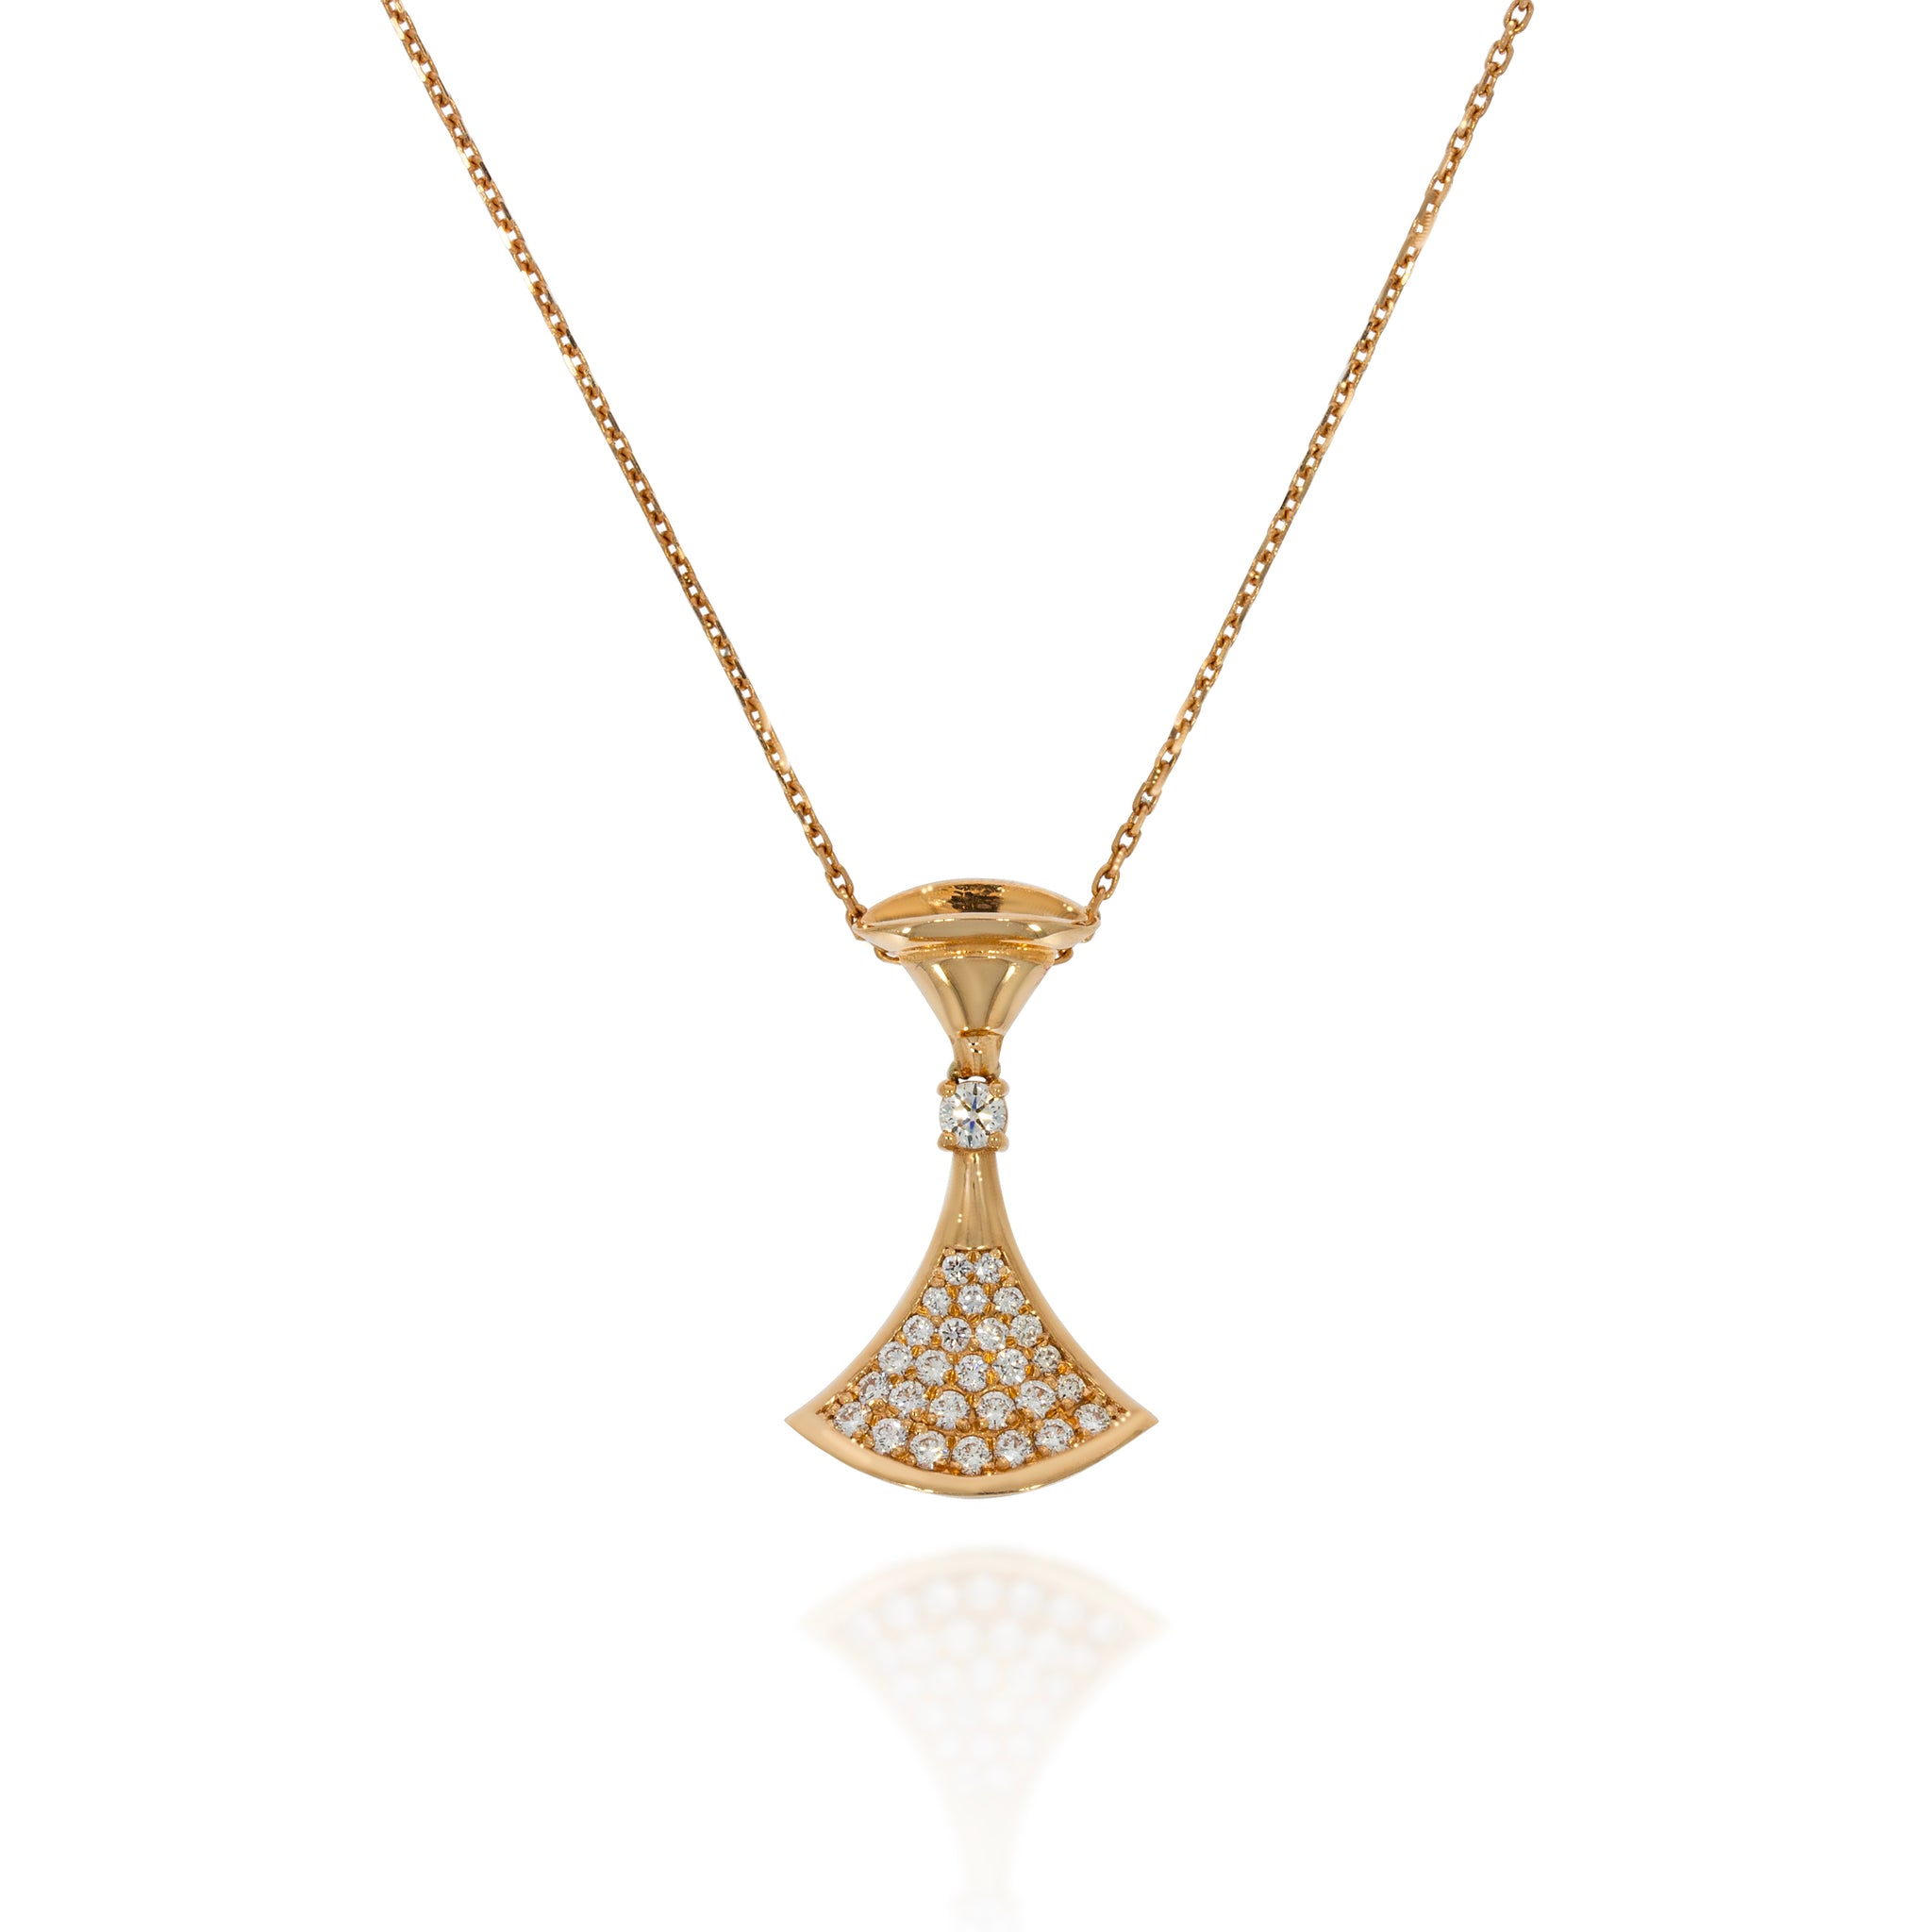 Exquisite 'IMPERIAL DIAMOND' Necklace by BVLGARI